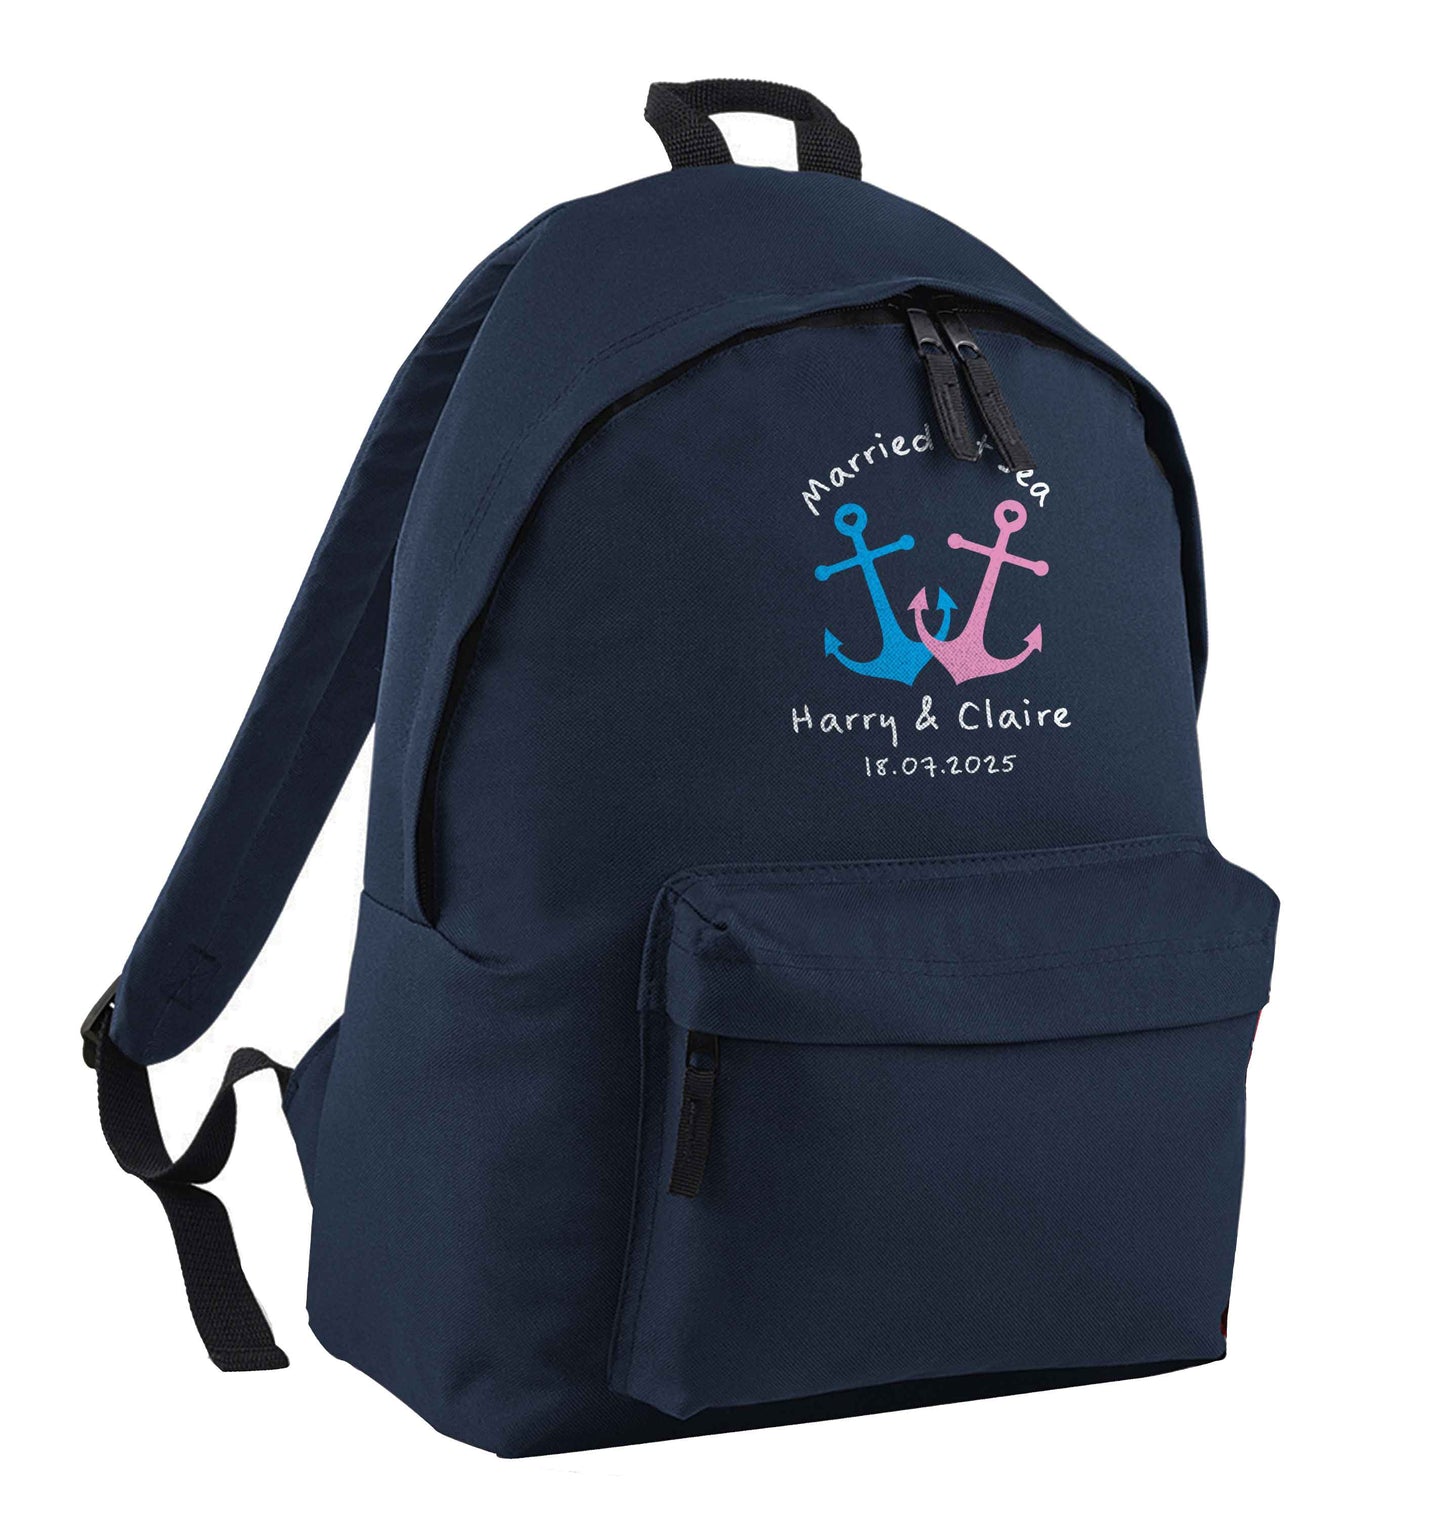 Married at sea navy adults backpack